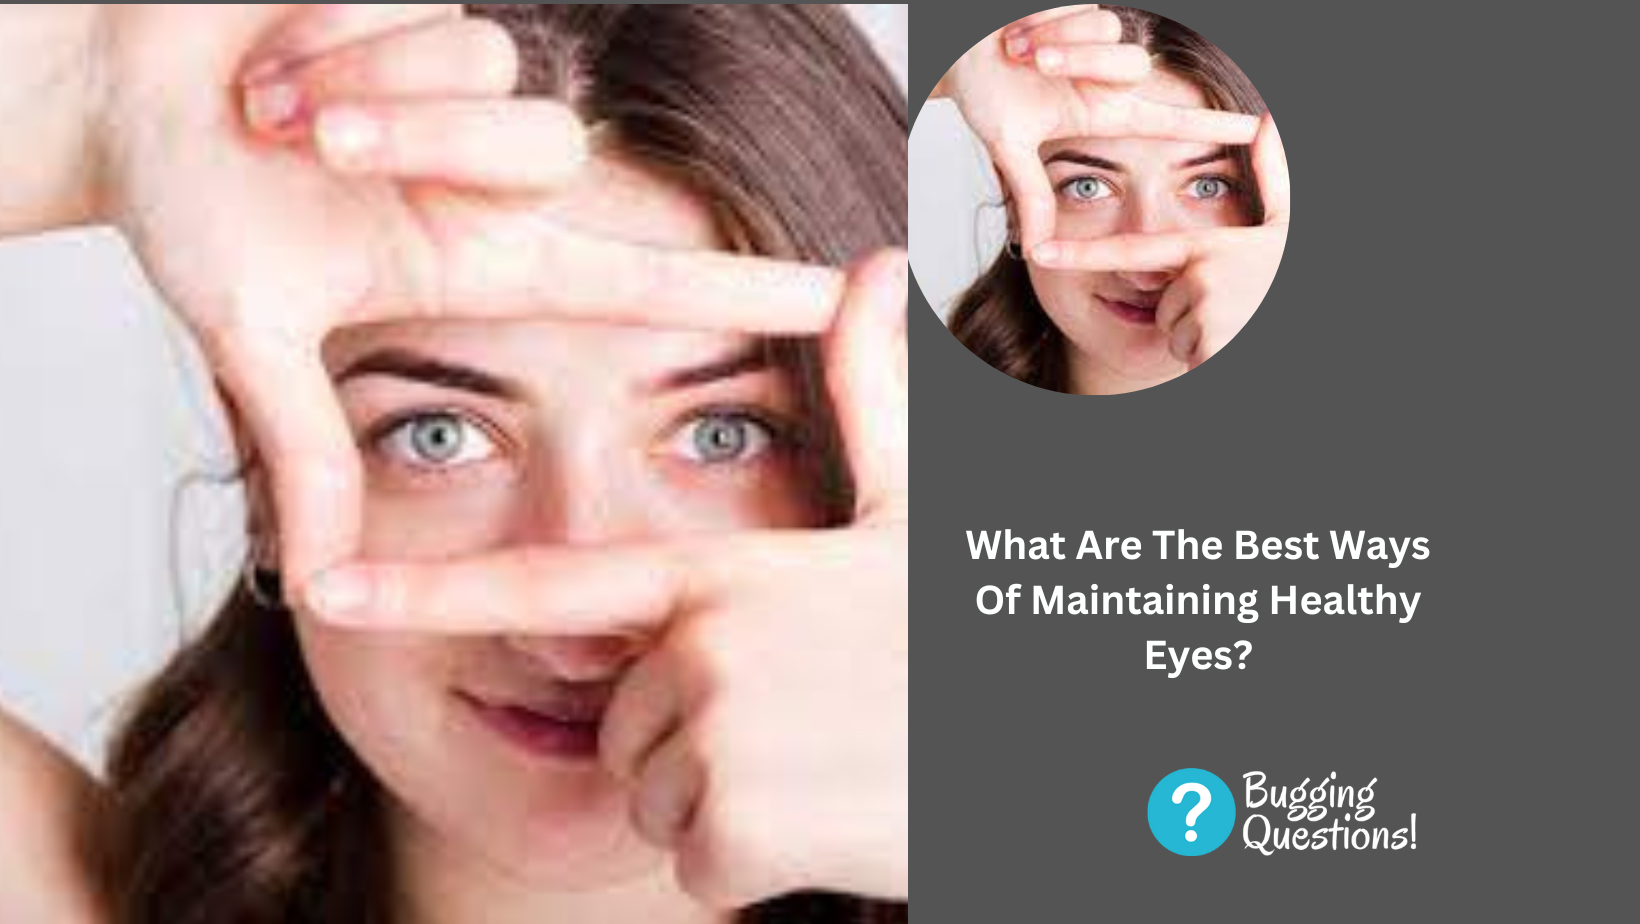 What Are The Best Ways Of Maintaining Healthy Eyes?